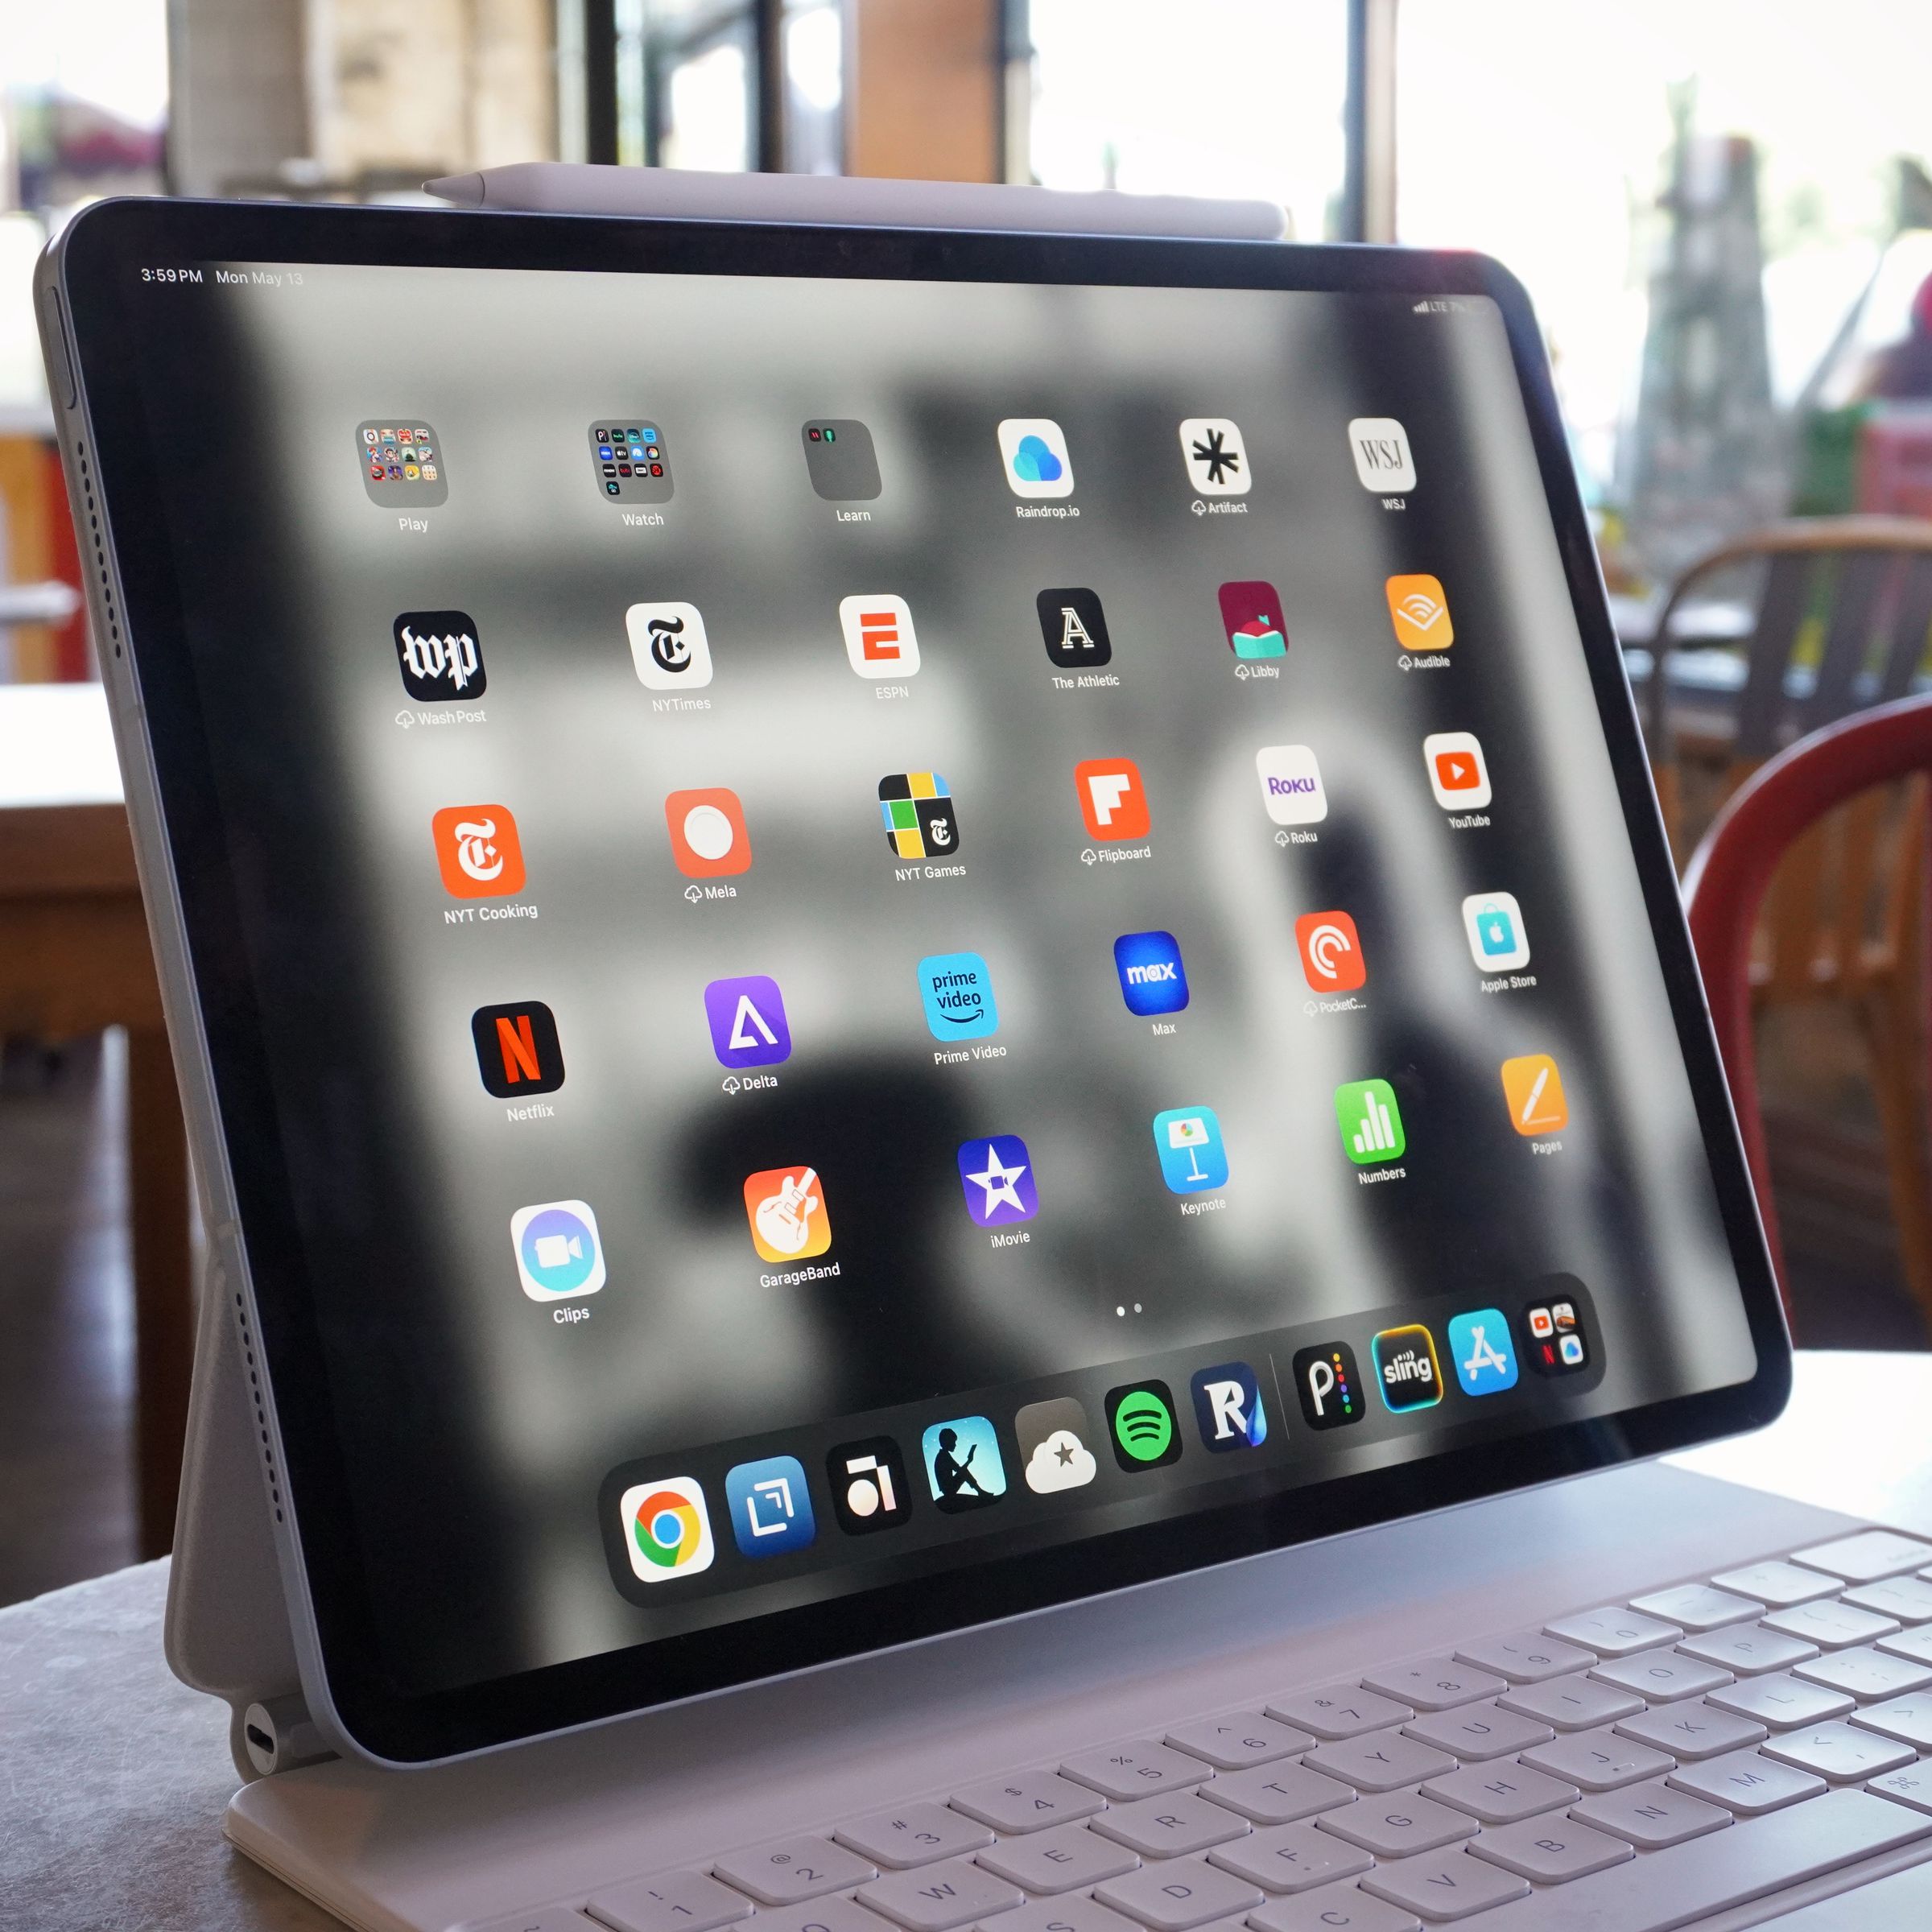 A photo of the iPad Air in a cafe setting.